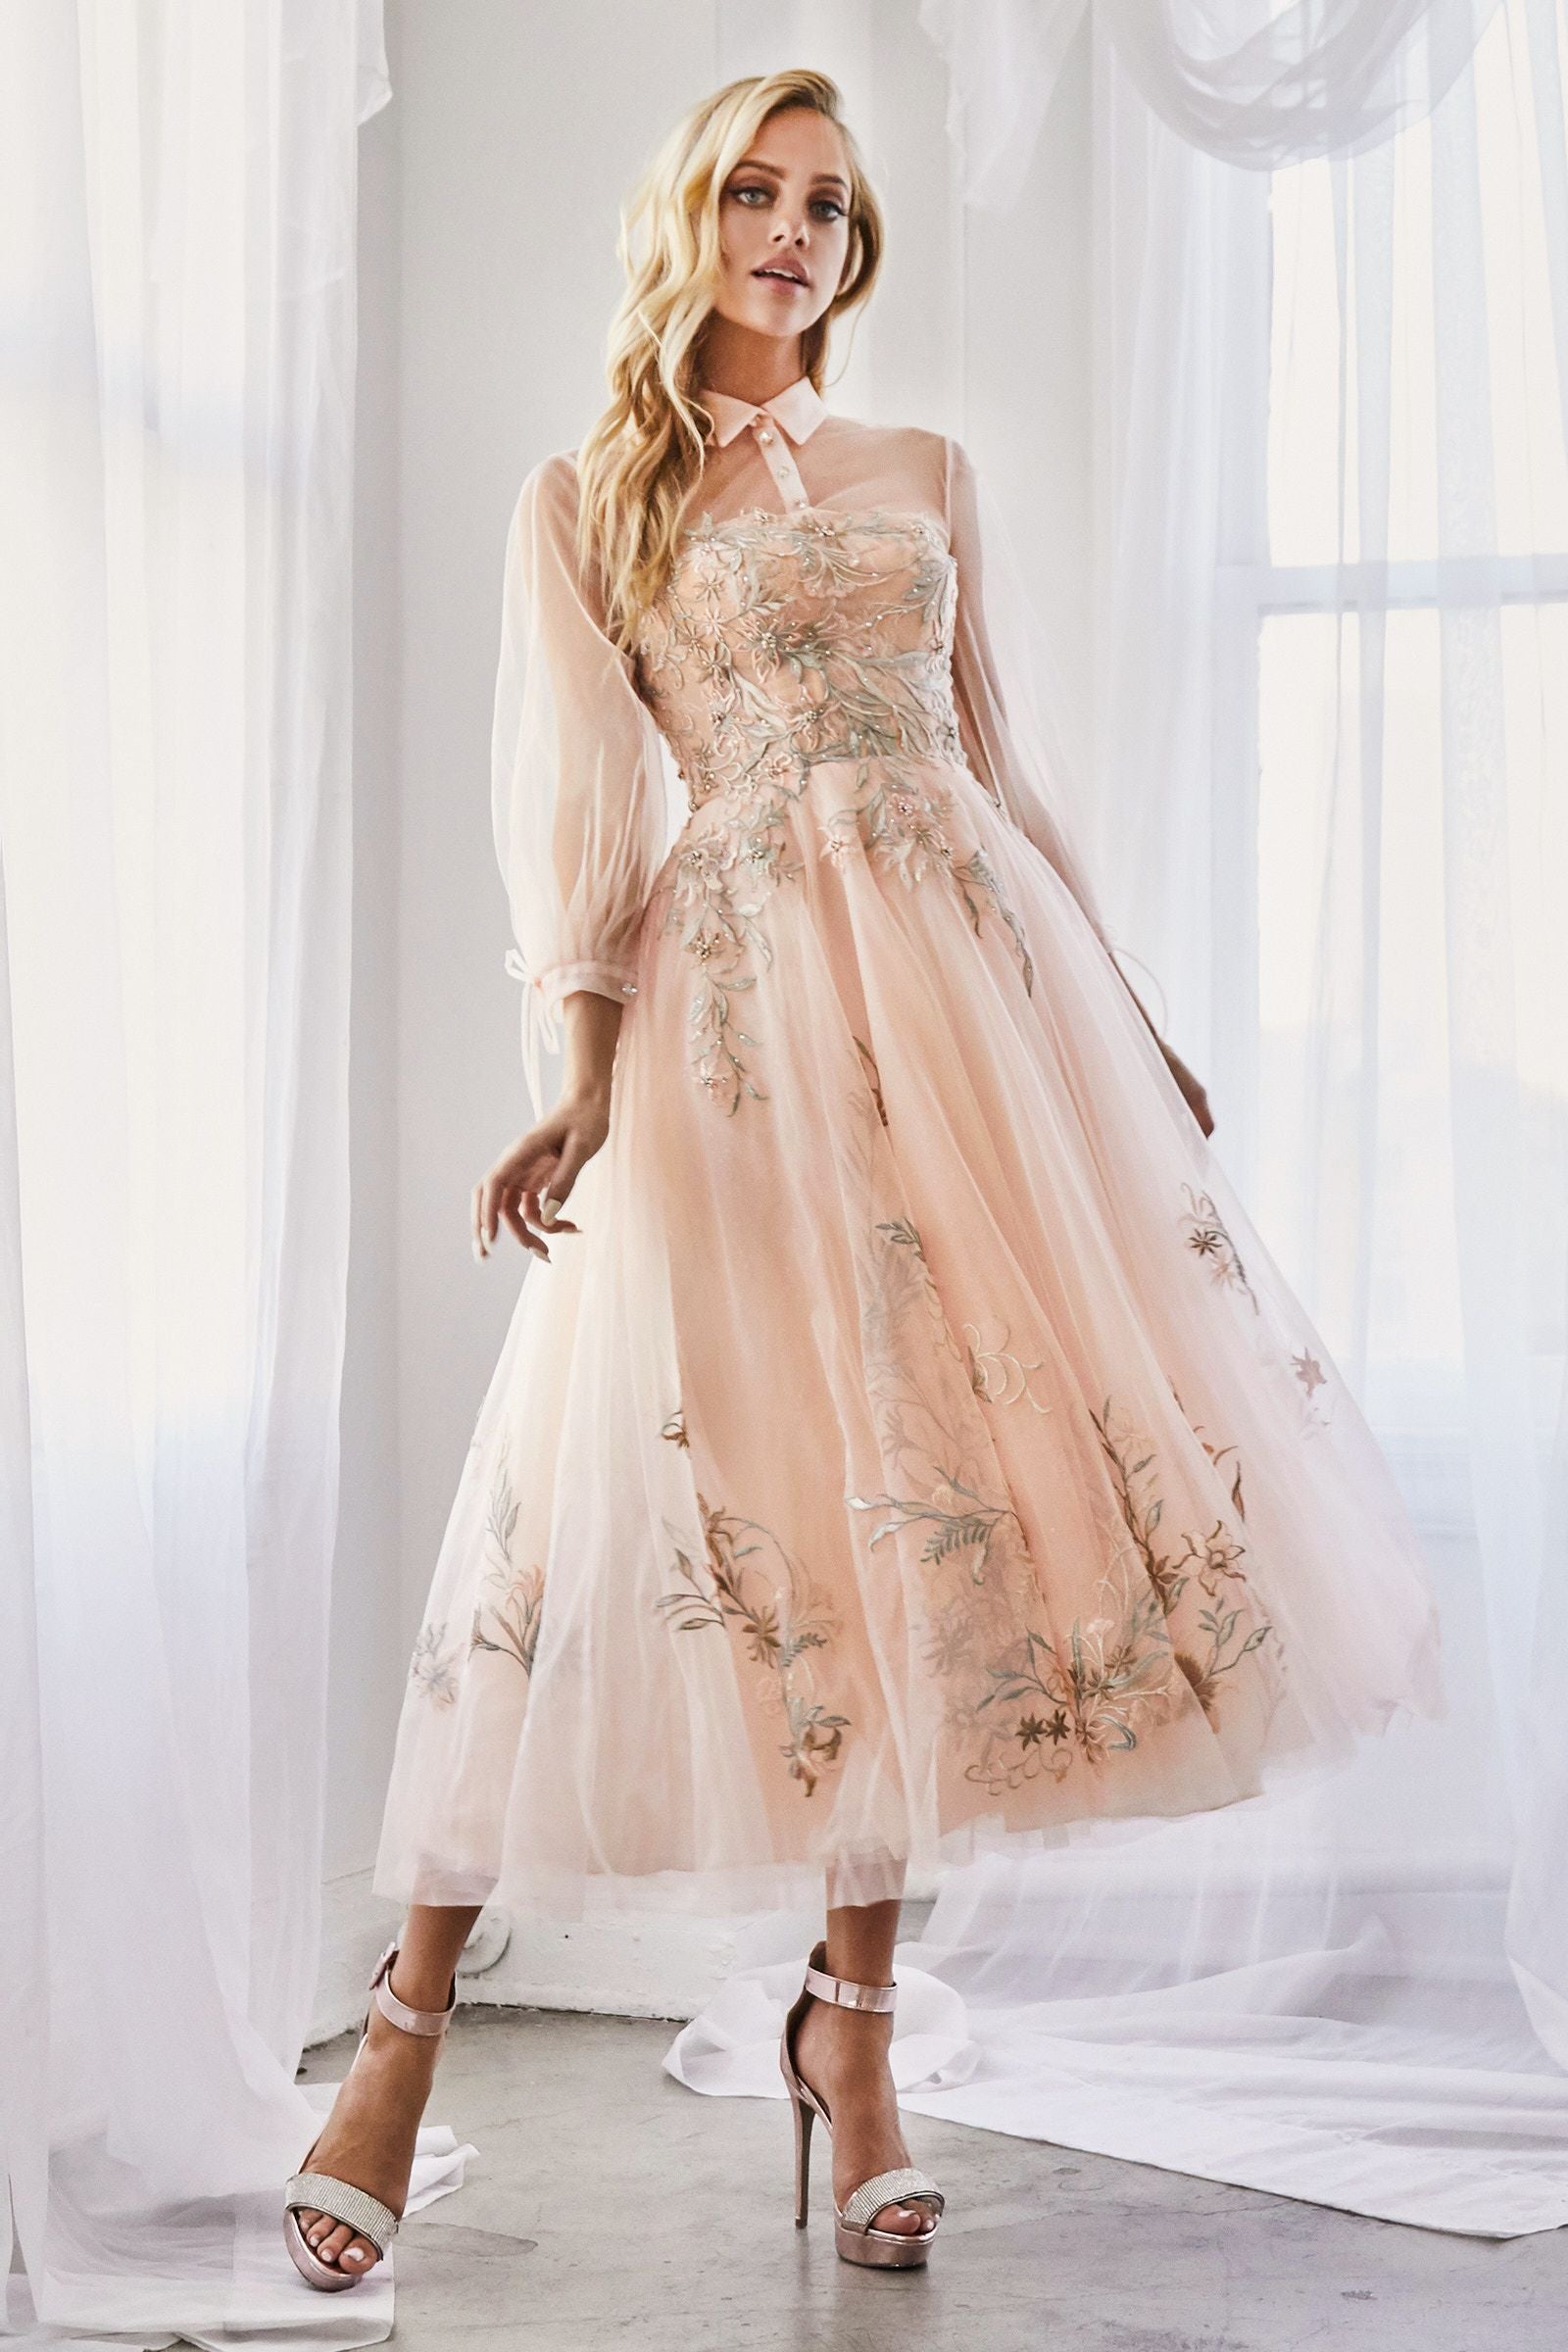 MyFashion.com - LONG SLEEVE TULLE EMBROIDERED LACE COCKTAIL GOWN WITH COLLAR AND BUTTON DETAILS. BACK ZIPPER AND BUTTON CLOSURE, NO STRETCH.(A0862) - Andrea&Leo promdress eveningdress fashion partydress weddingdress 
 gown homecoming promgown weddinggown 